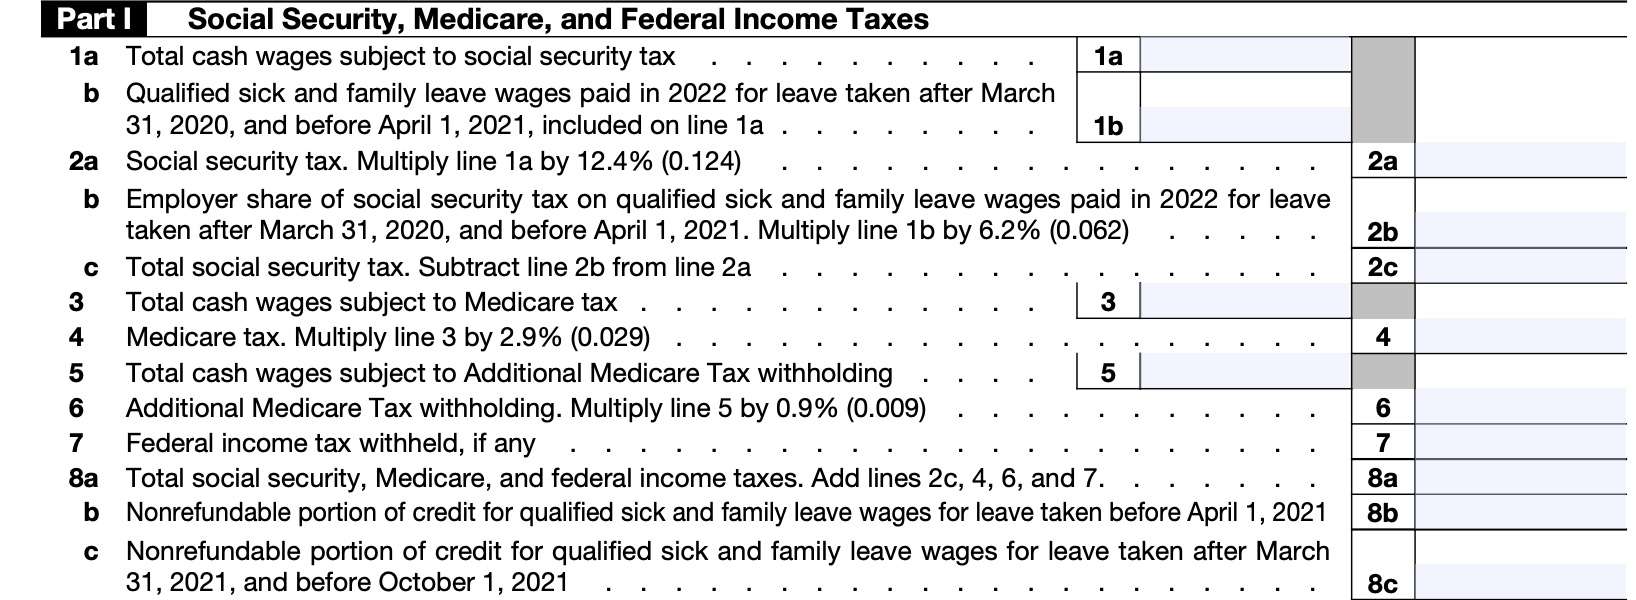 irs schedule h, part I: Social Security, medicare, and federal income taxes